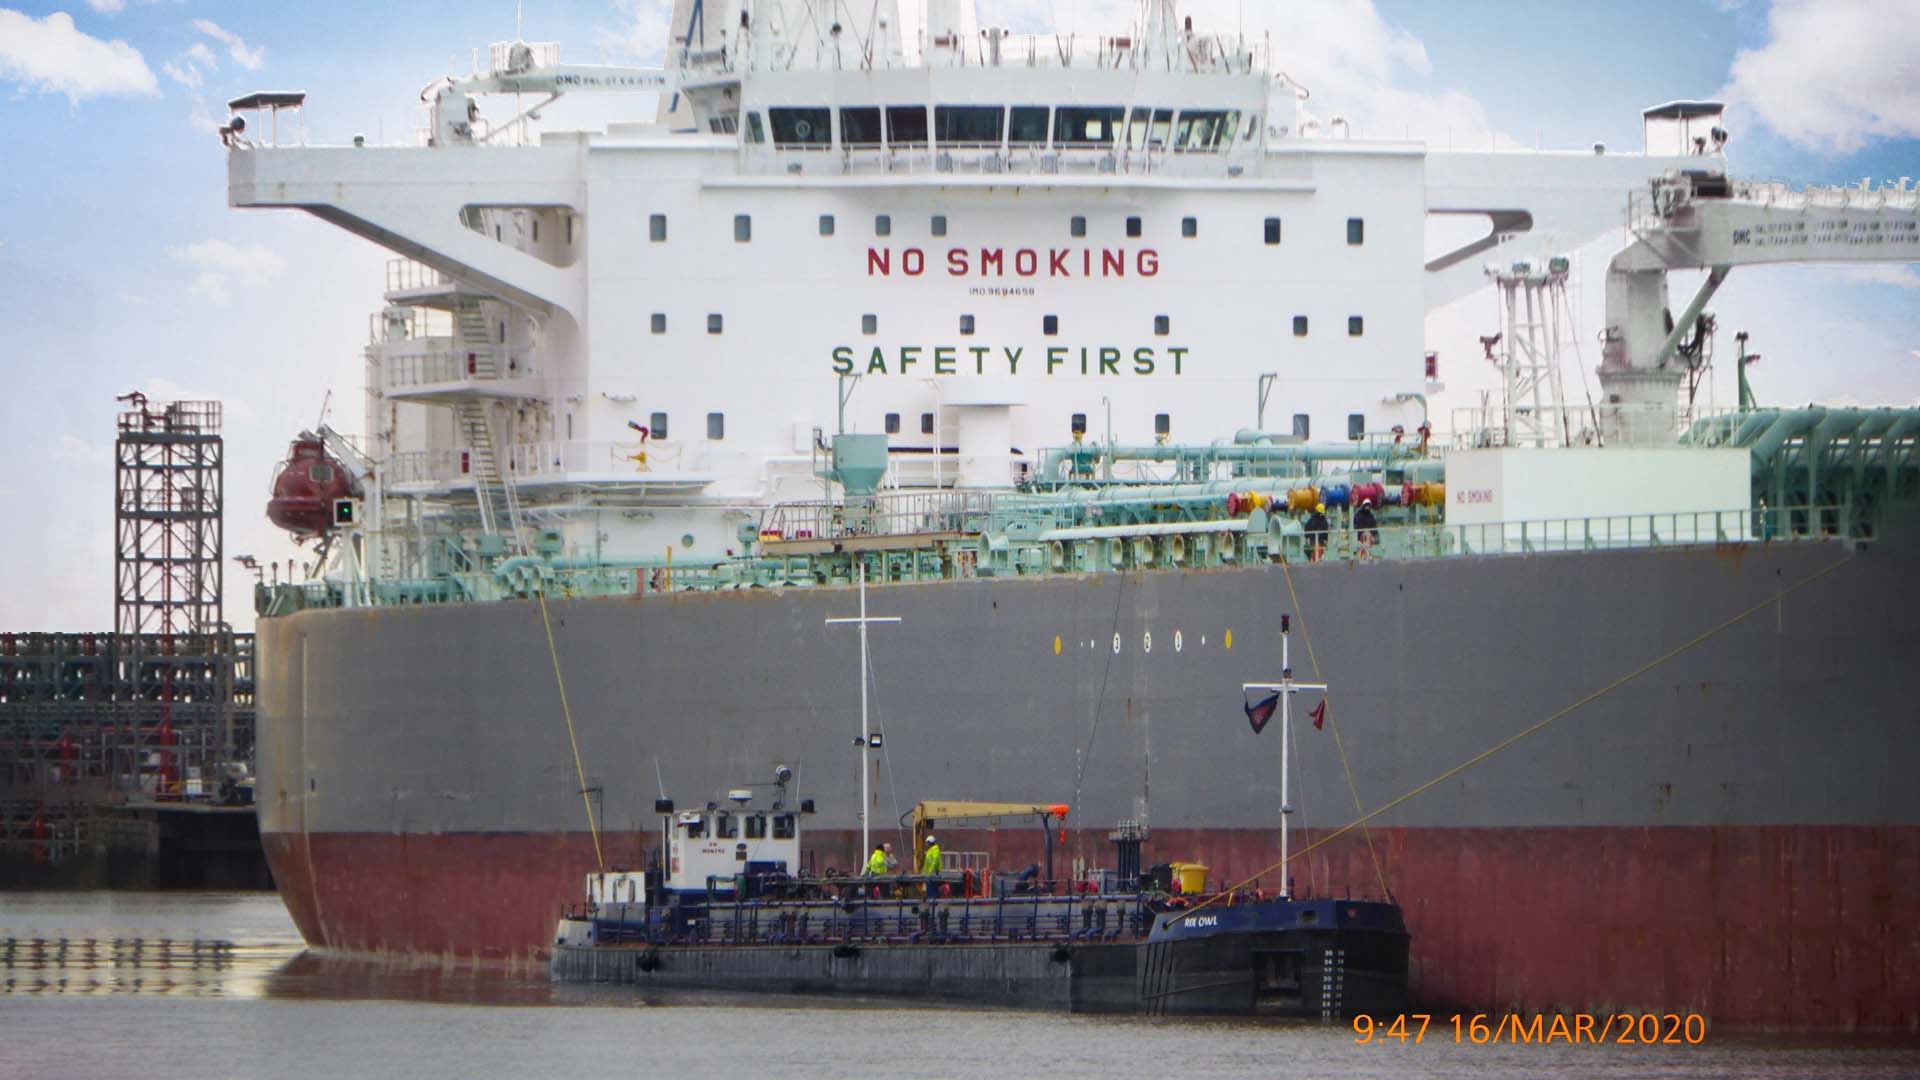 The Rix Owl refuelling the Nissos Christiana a 115,000 DWT oil tanker at Immingham Oil Terminal.